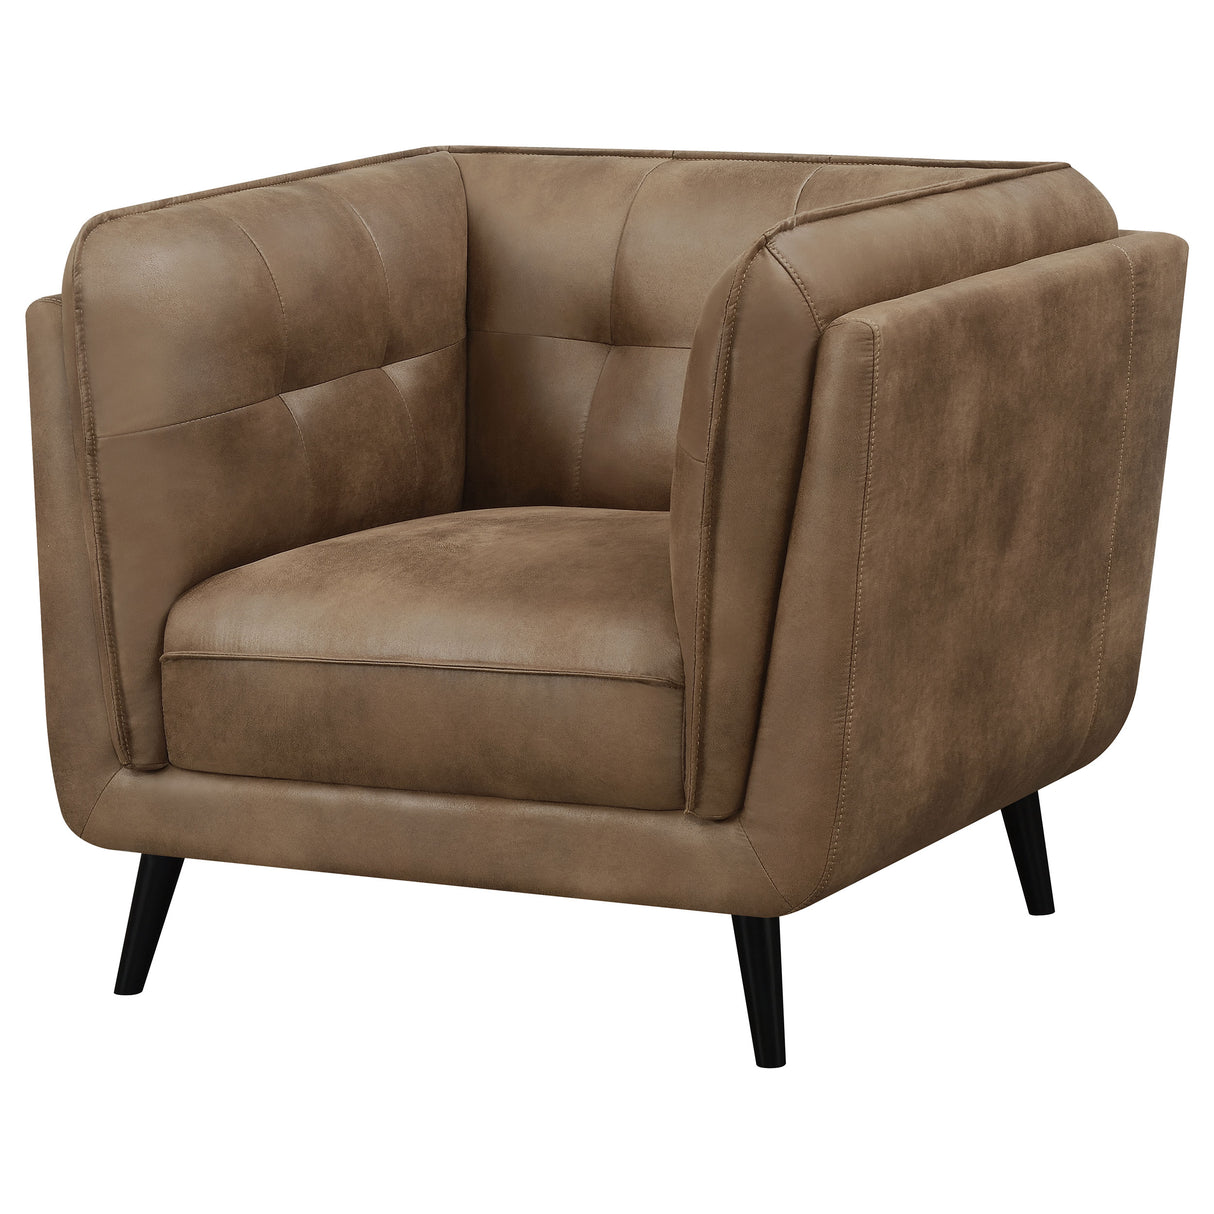 Chair - Thatcher Upholstered Button Tufted Chair Brown